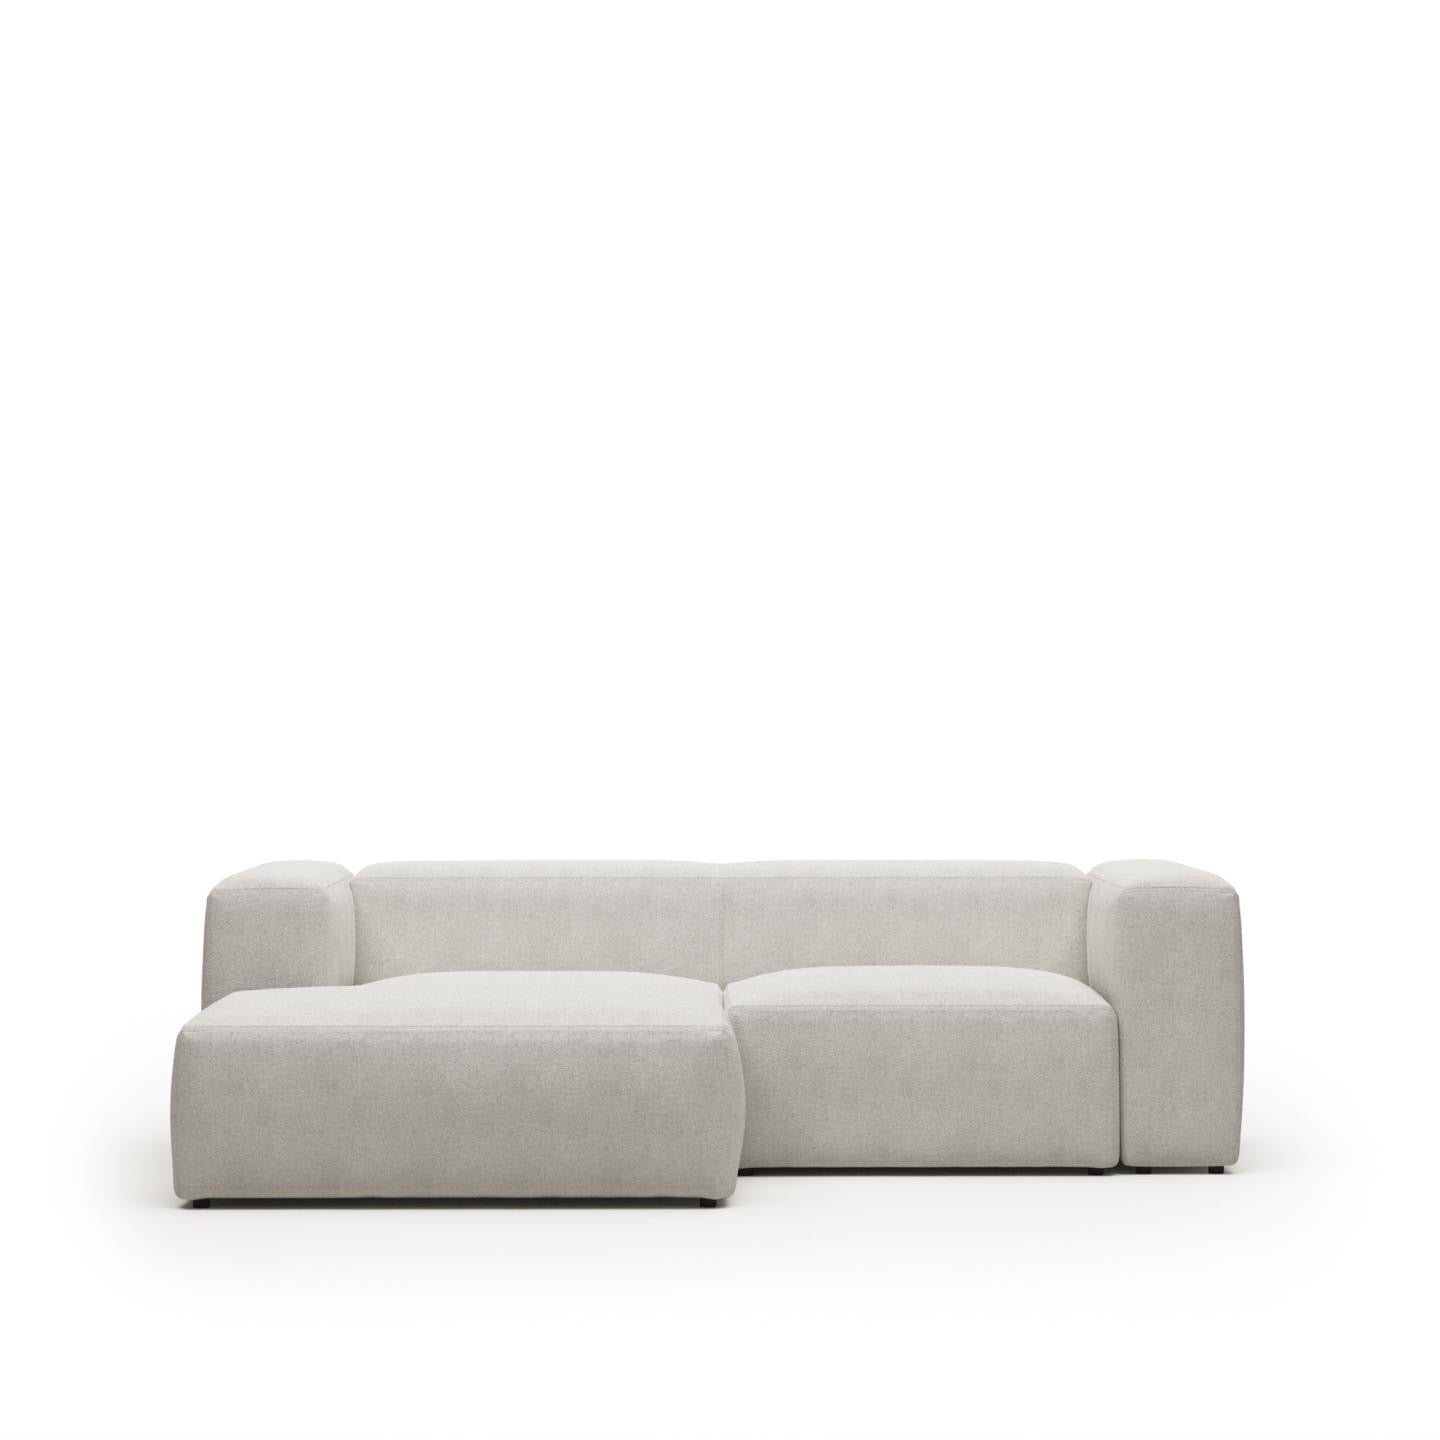 Lund 2 Seater Sofa with Left Side Chaise - White Fleece